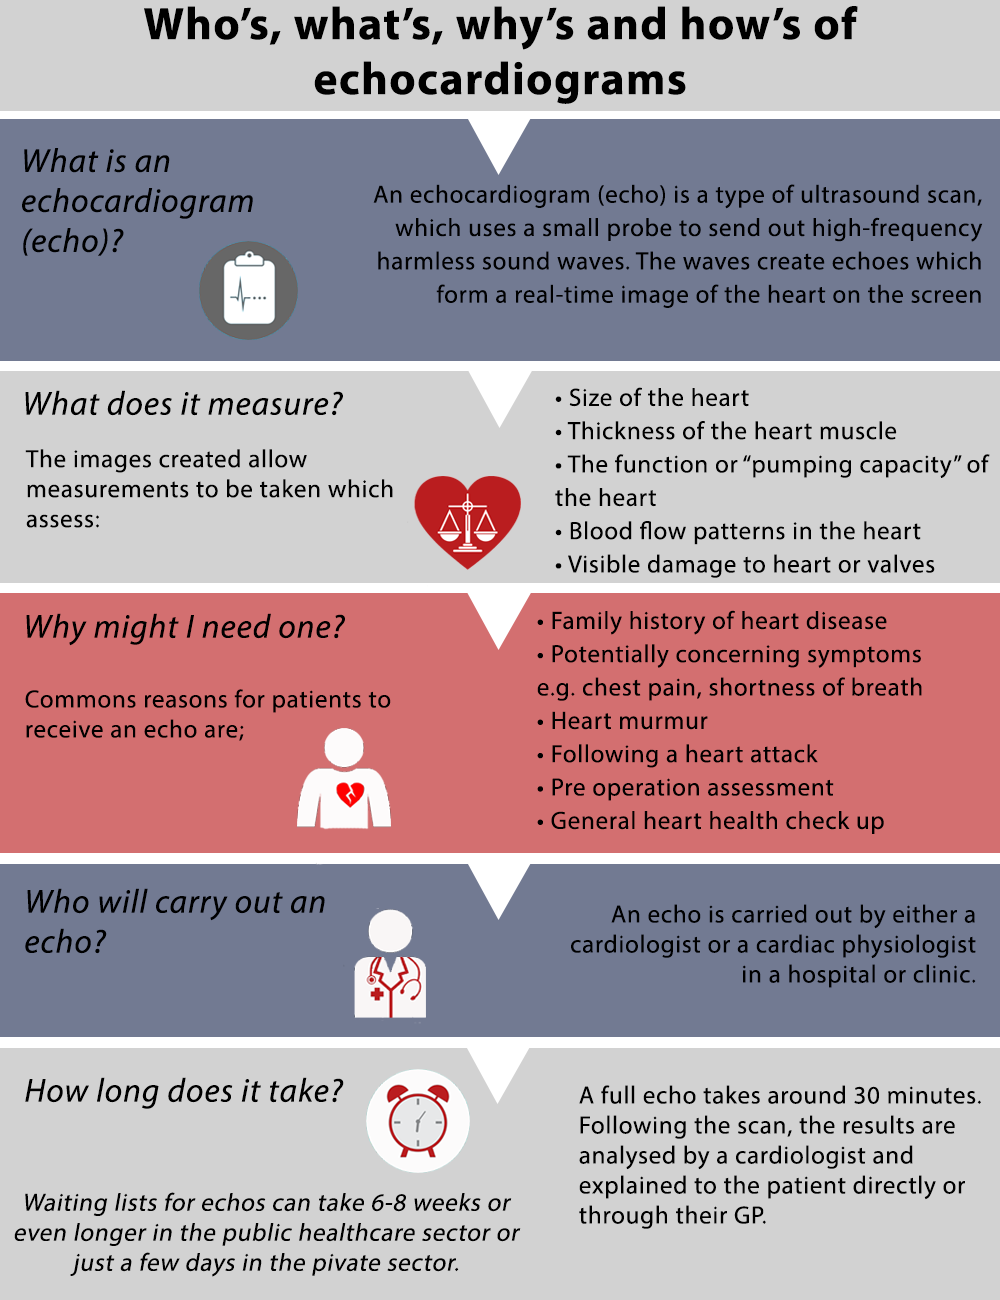 Infographic on the who's, what's, why's and how's of echocardiograms 